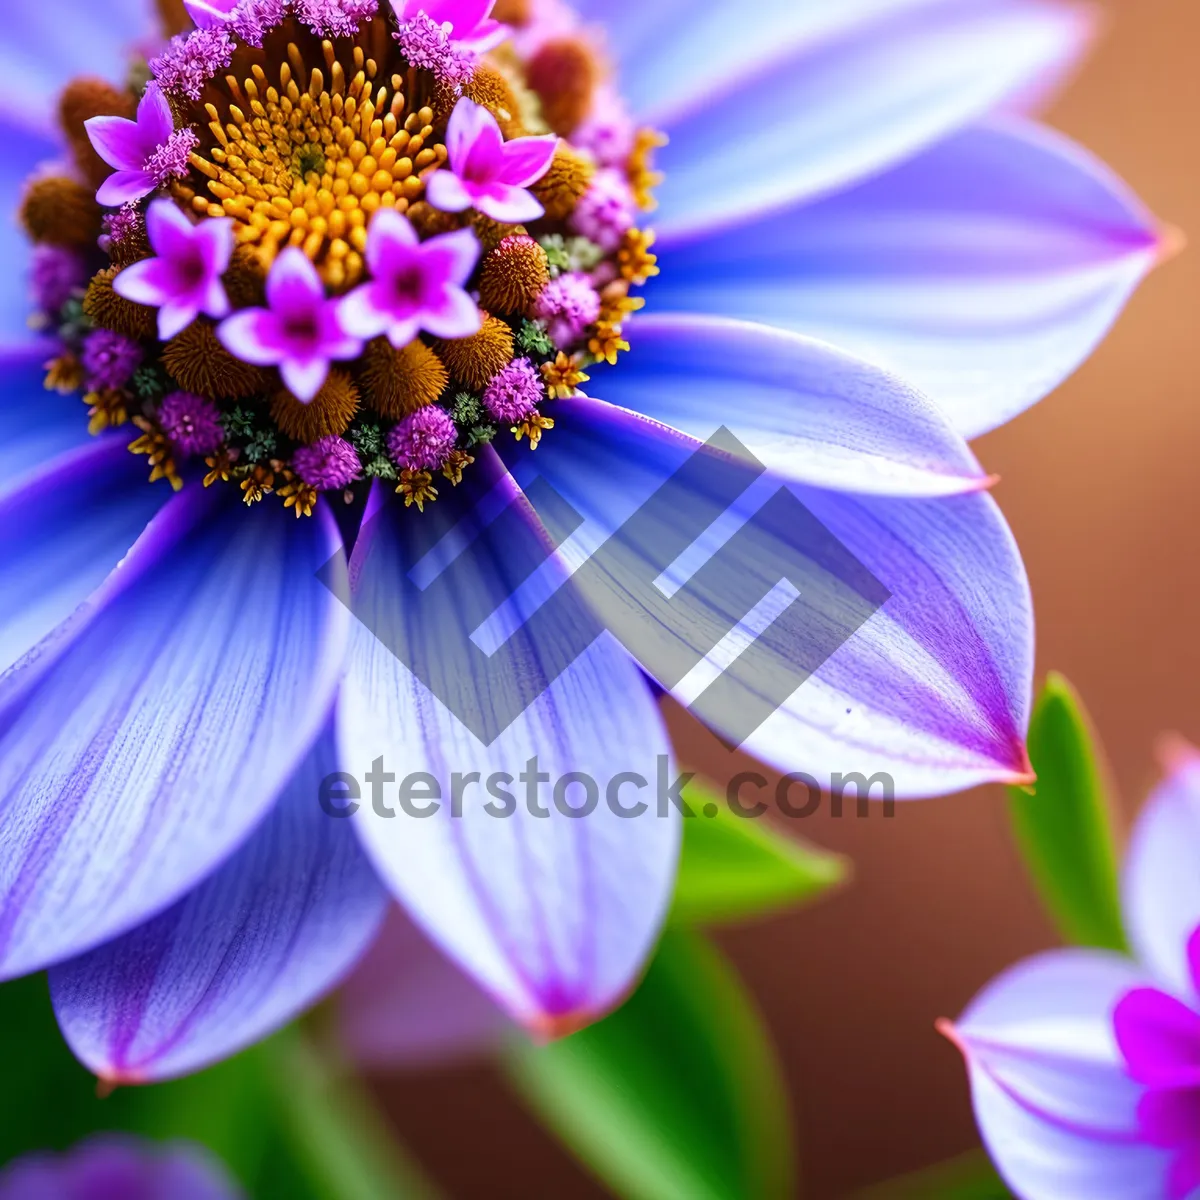 Picture of Vibrant Pink Daisy Blossom in Summer Garden